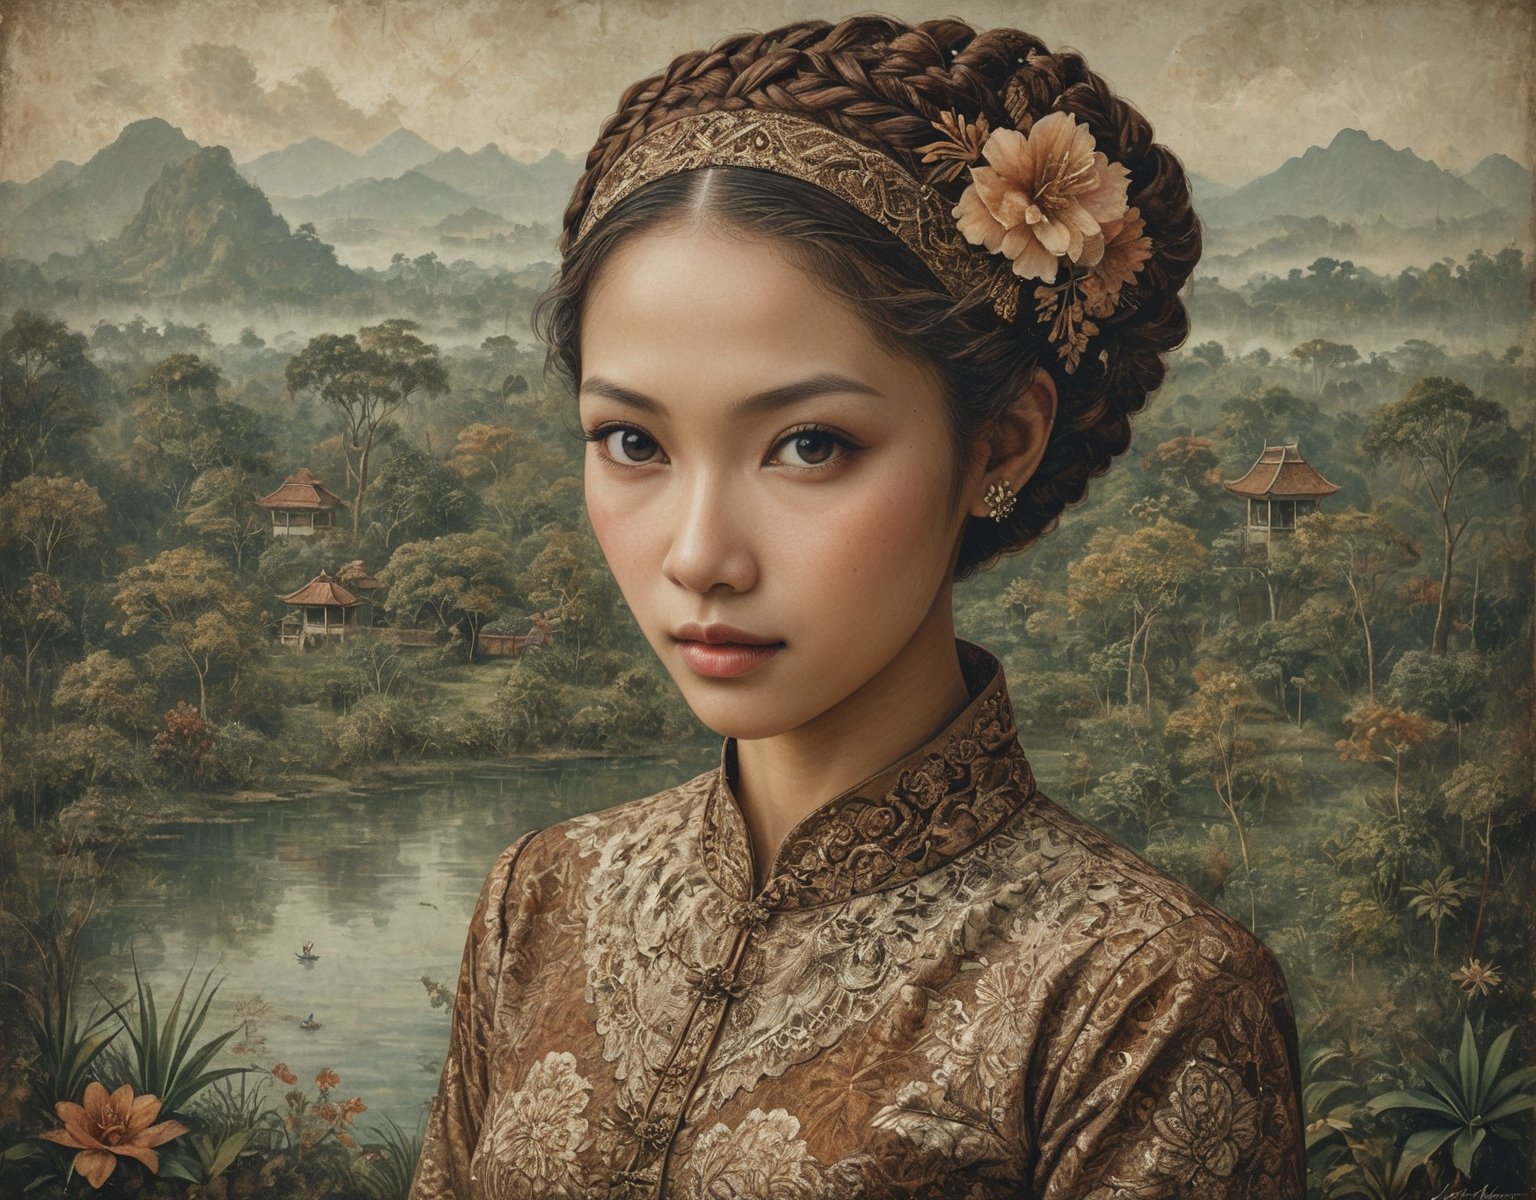 A Javanese women, 29 yo, wearing kebaya and batik, braid hairstyle, with nature background, this enchanting photo serves as a tribute to the artistry and enduring legacy of these three iconic Dutch painters, an art deco painting
